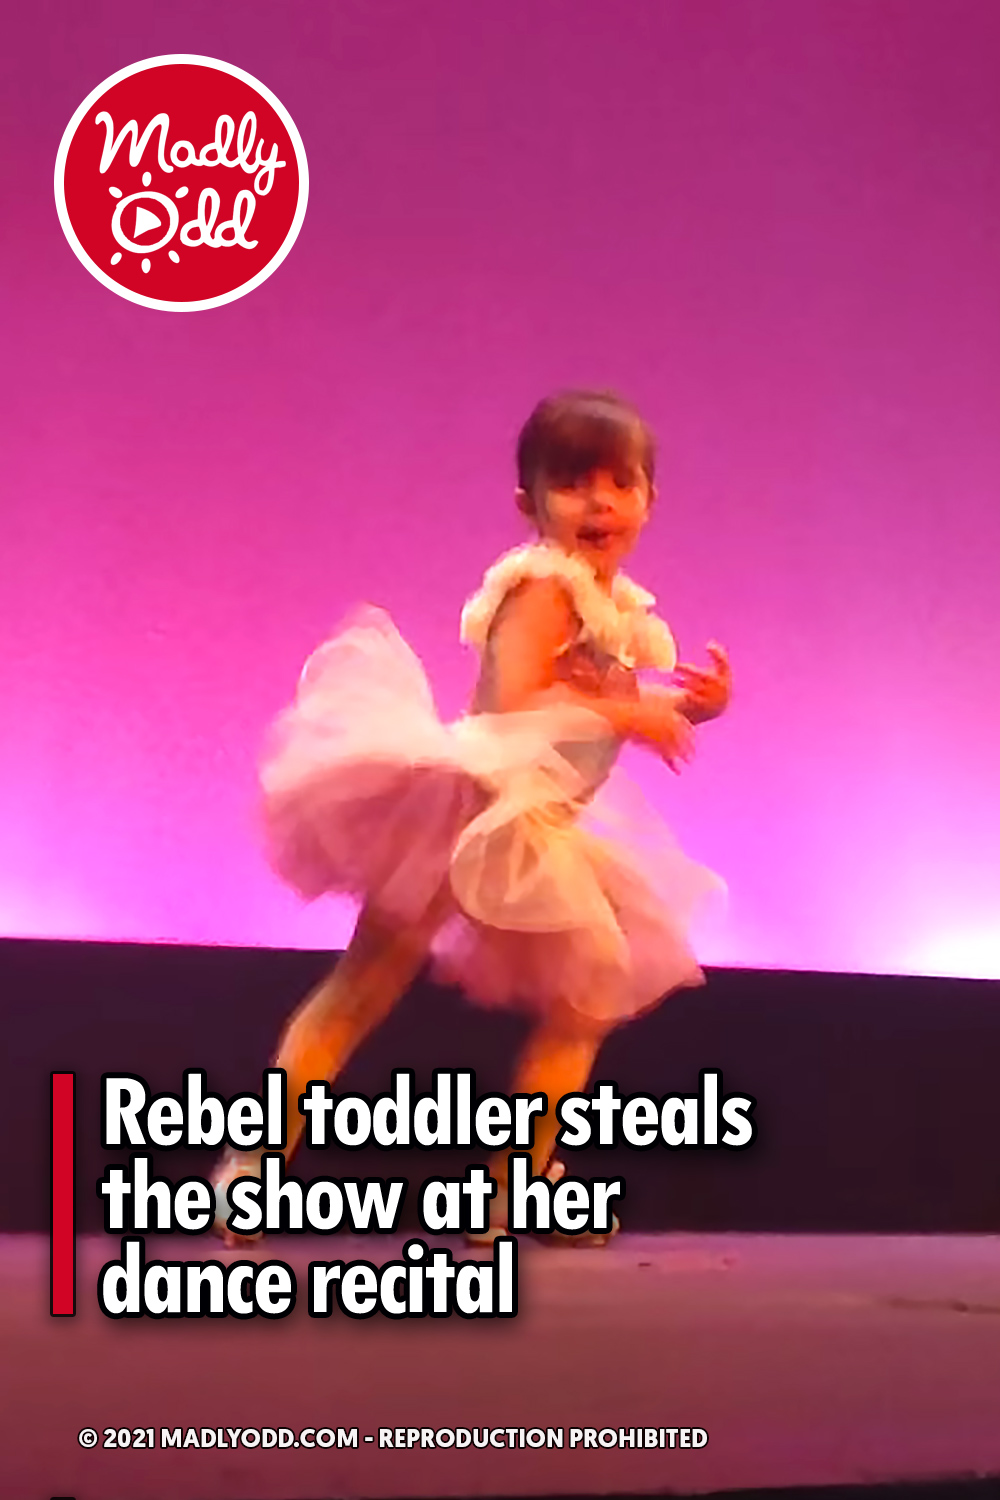 Rebel toddler steals the show at her dance recital